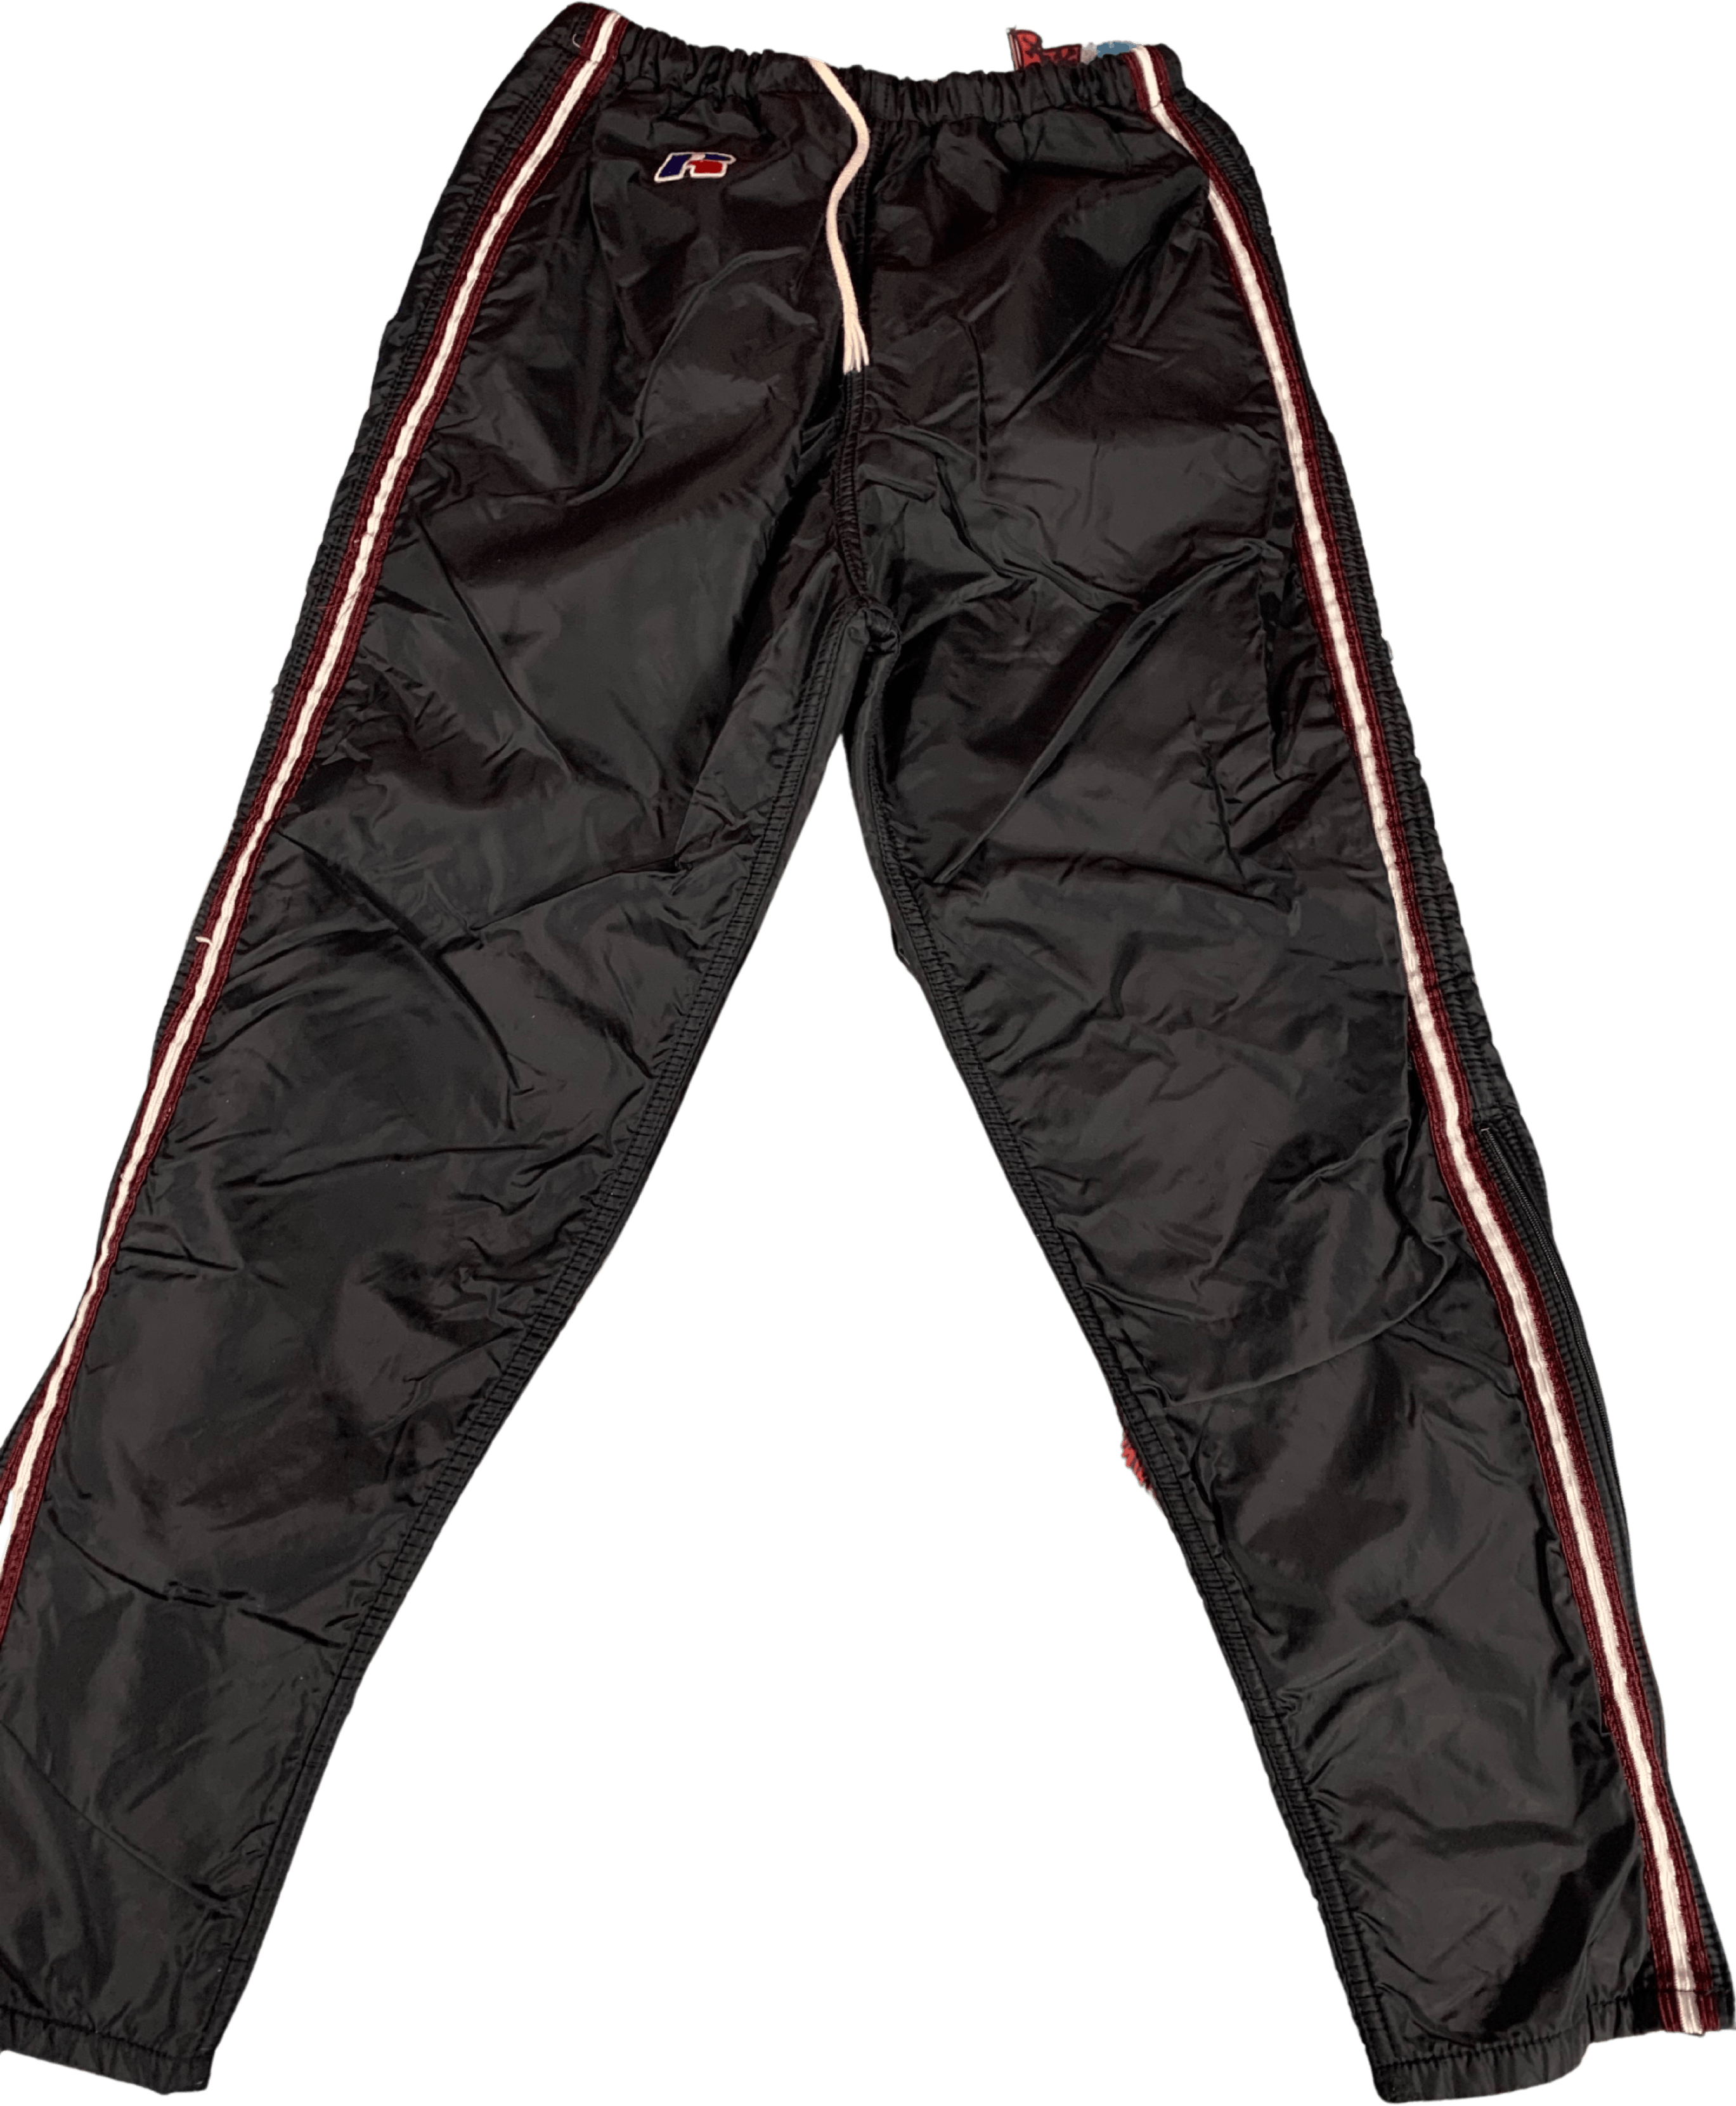 Russell Athletic wind-pants  Russell athletic, Athletic pants